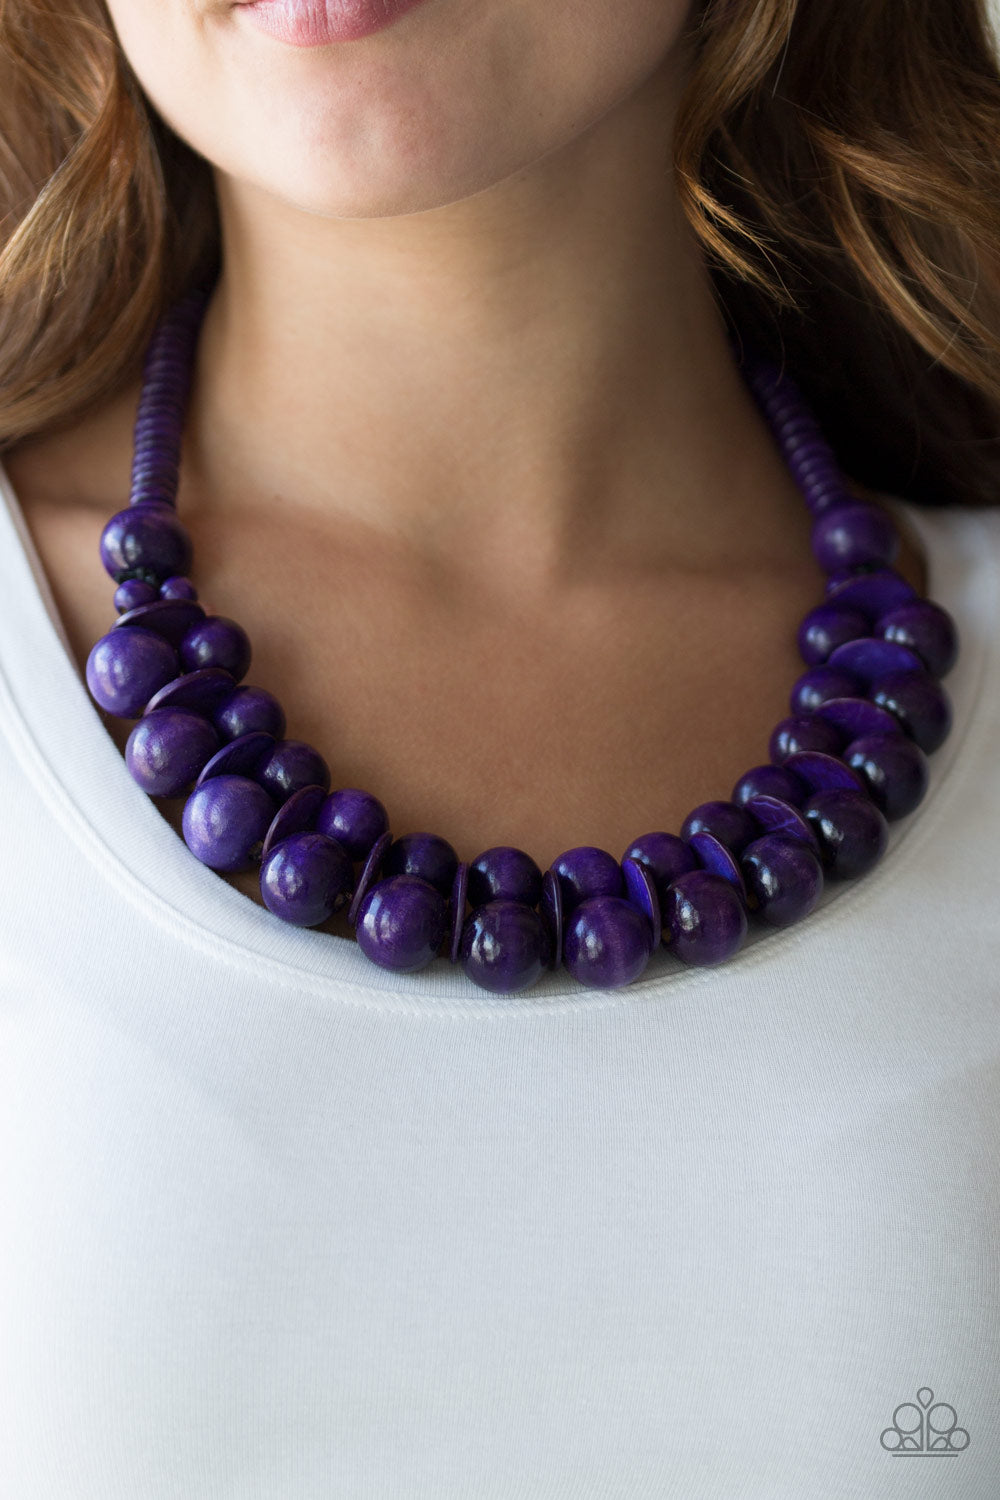 Caribbean Cover Girl - Purple Necklace 1203N